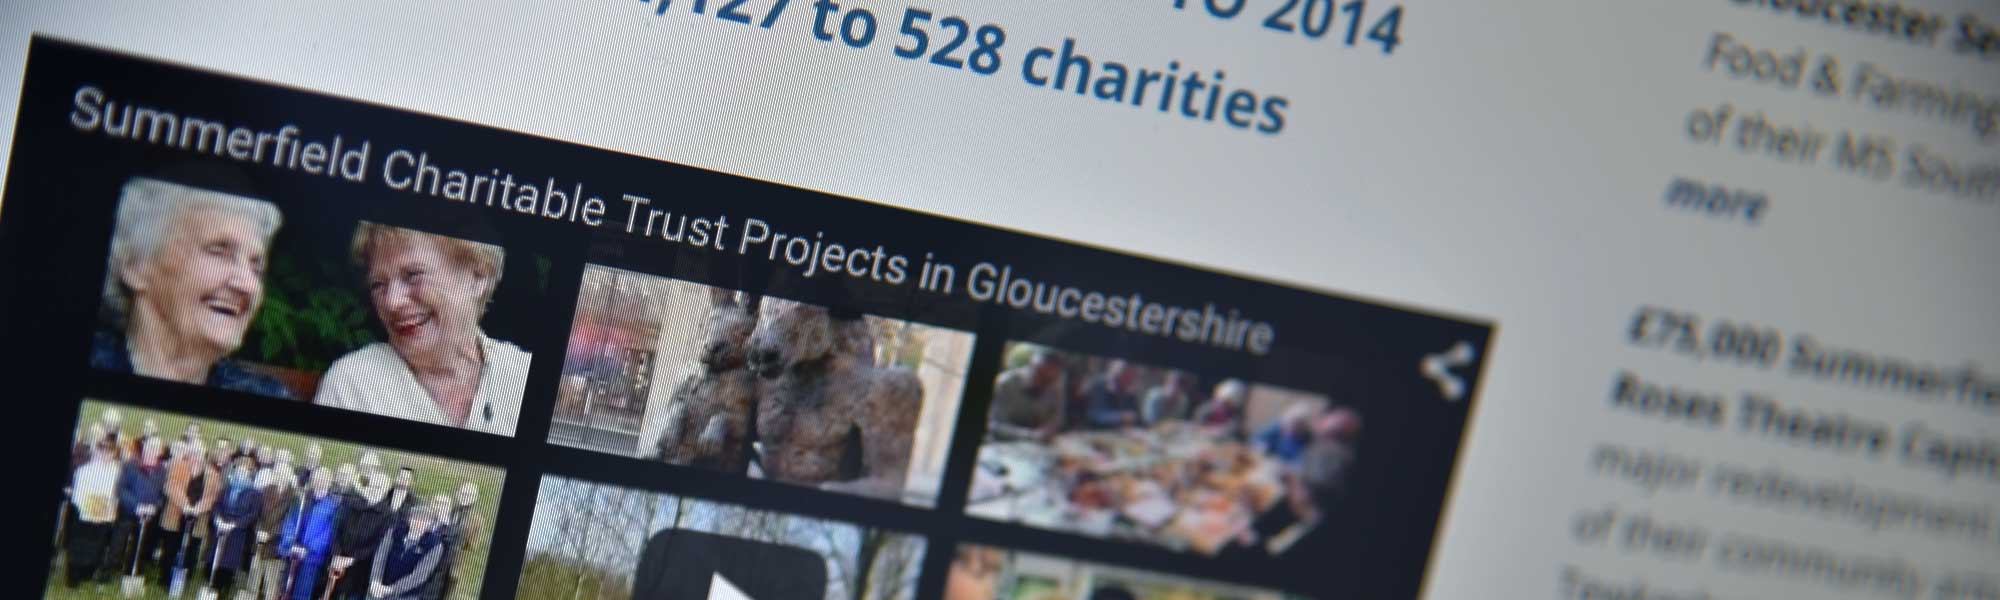 Charity Video Gloucestershire